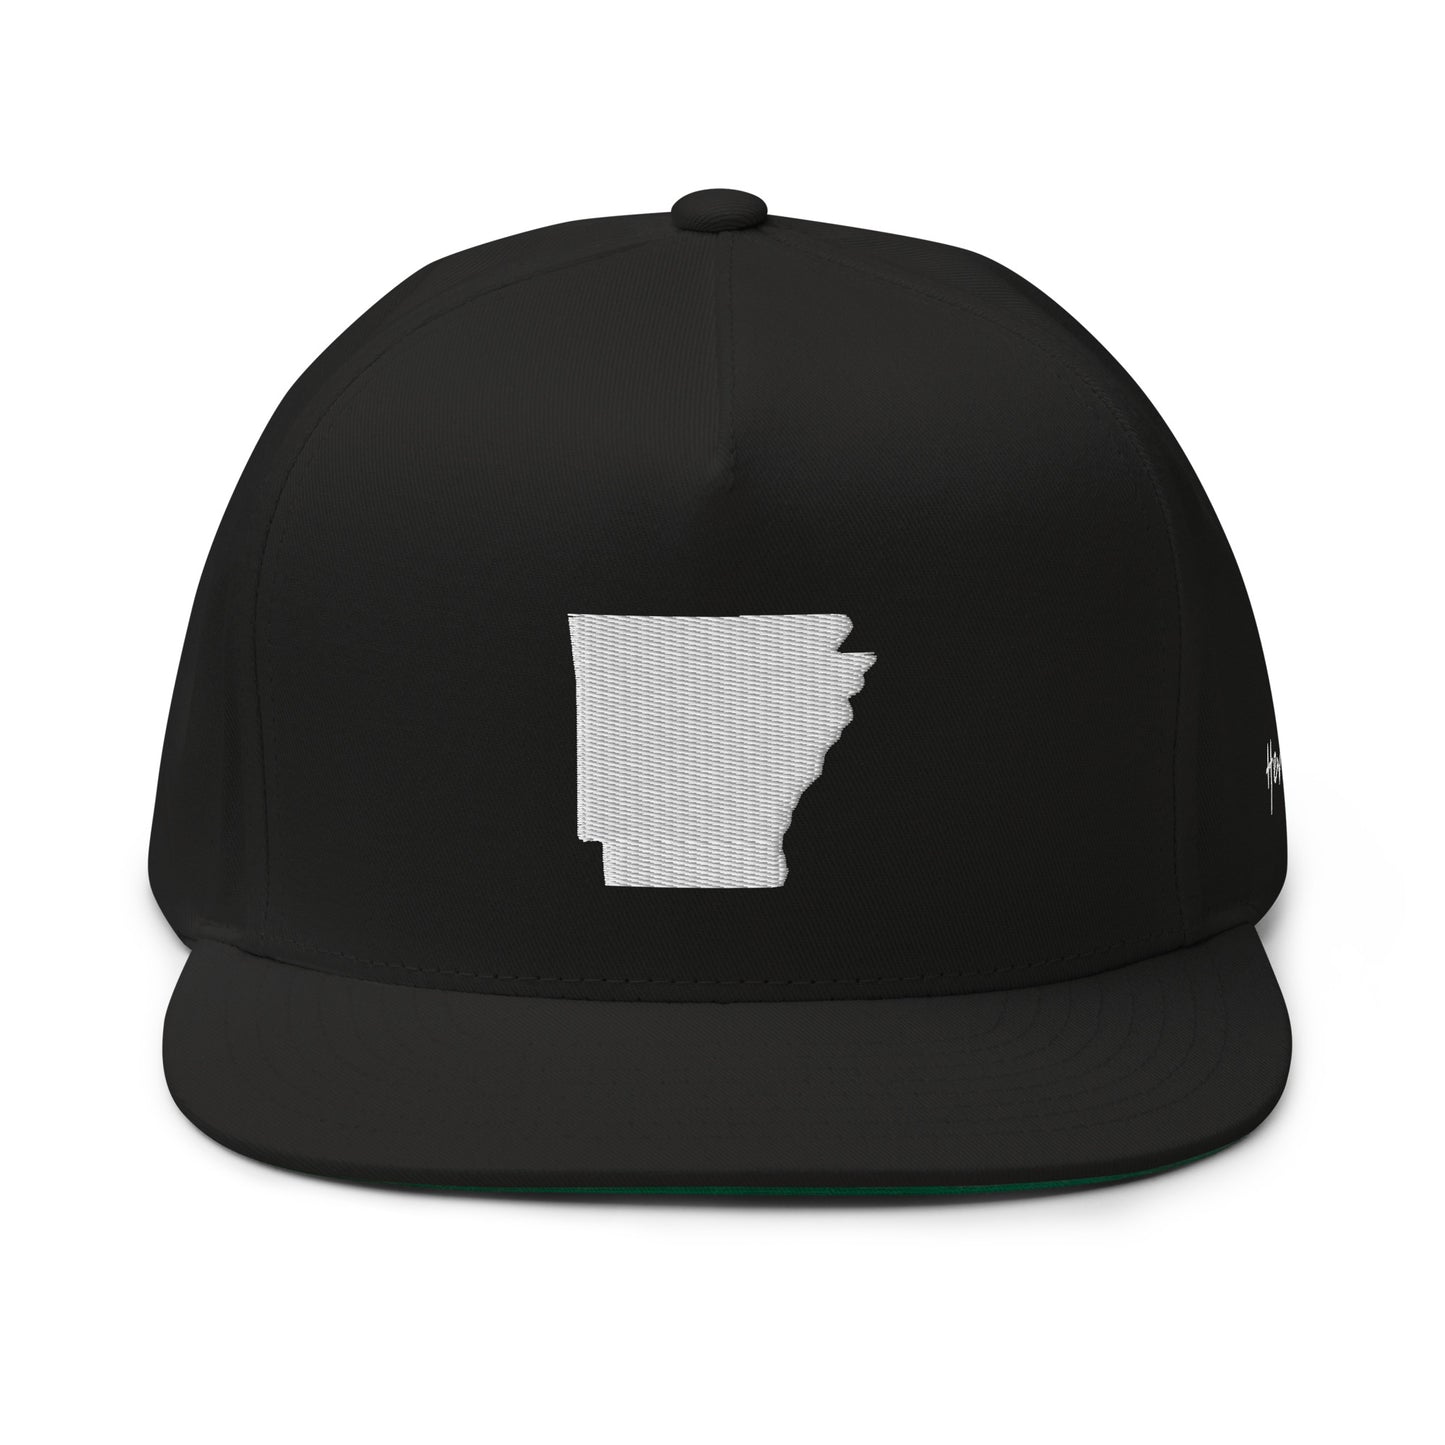 Arkansas State Silhouette 5 Panel A-Frame Snapback Hat